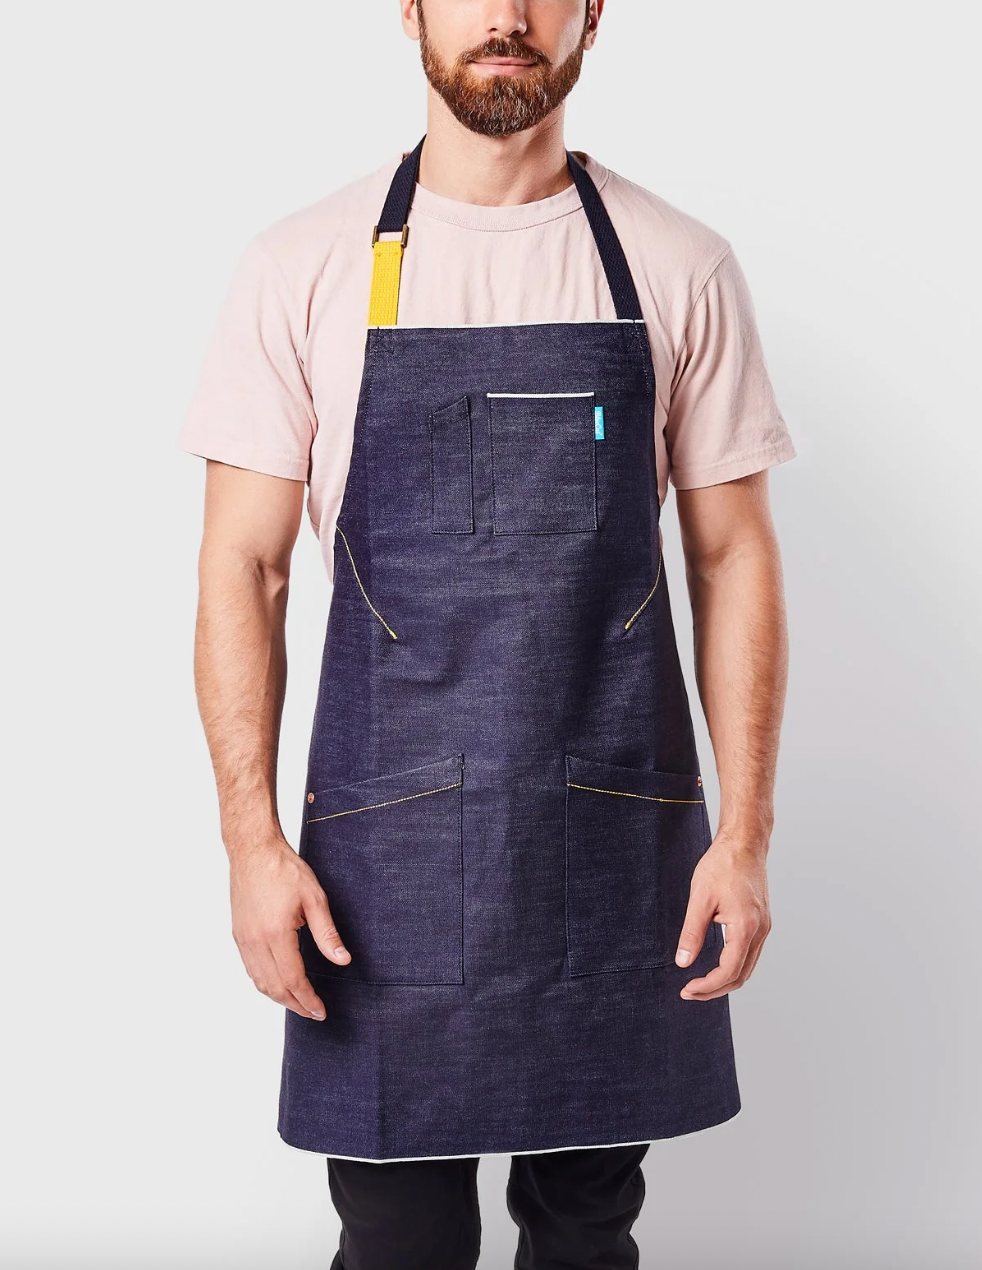 Hedley & Bennett Georgia Blue Crossback Apron - Professional Chef Apron with Pockets and Cross-Back Straps for Cooking & Grilling - Kitchen Aprons